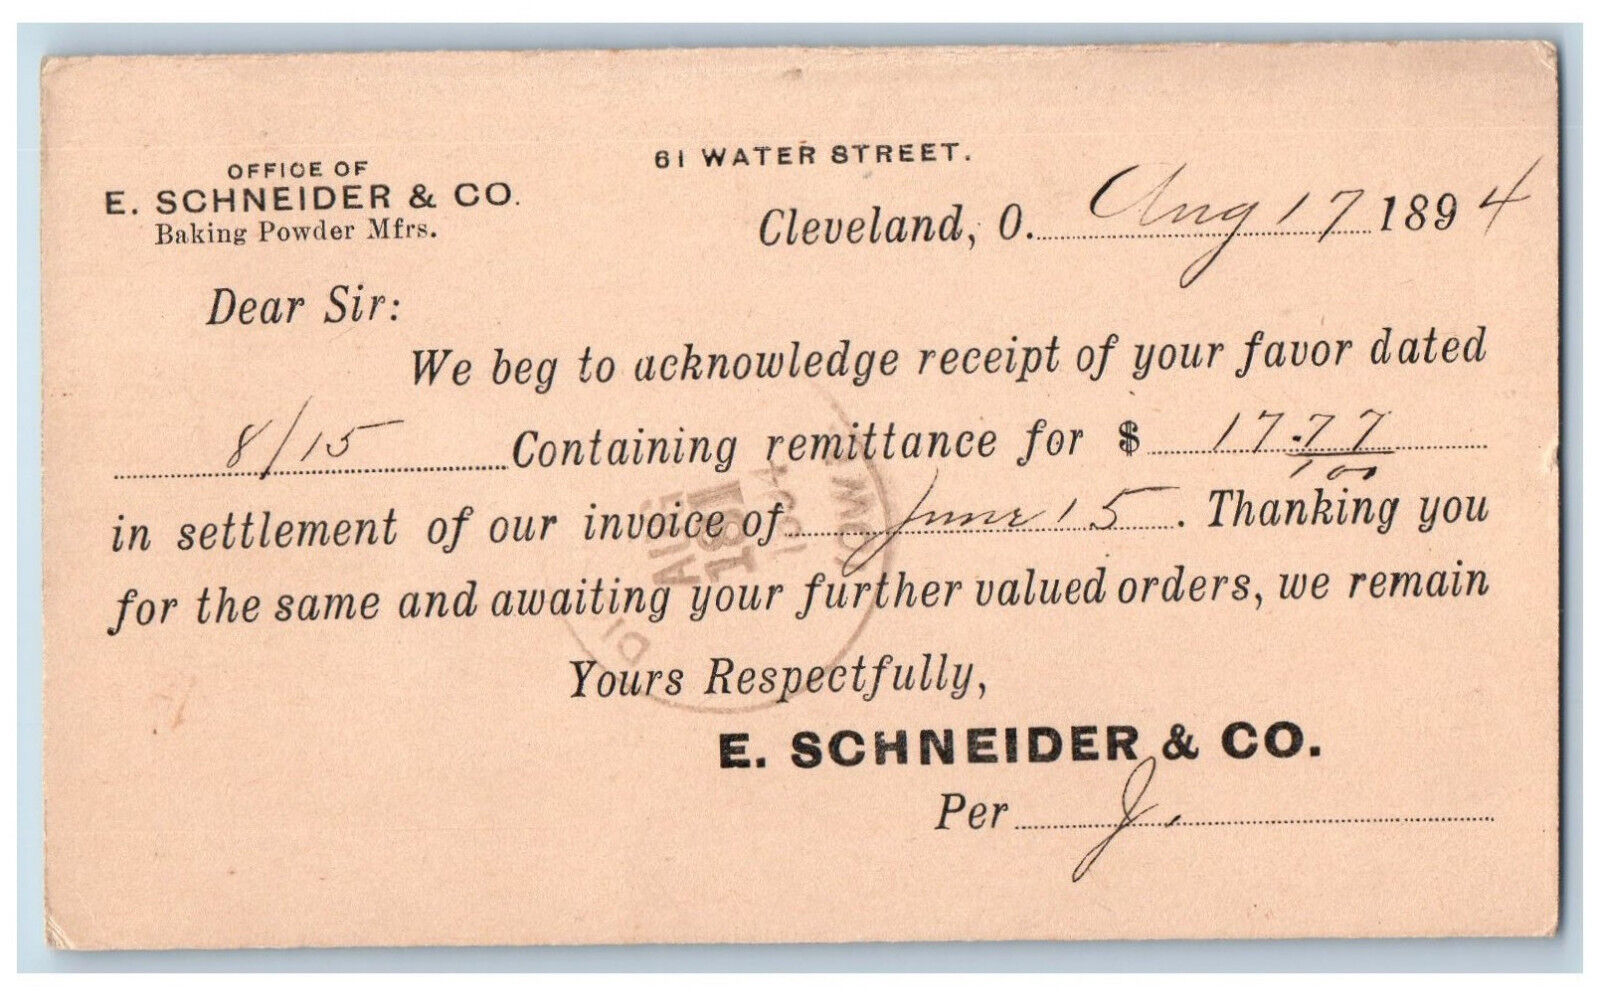 Cleveland Ohio OH Postal Card Office of E.Schneideer & Co. 1894 Antique Posted